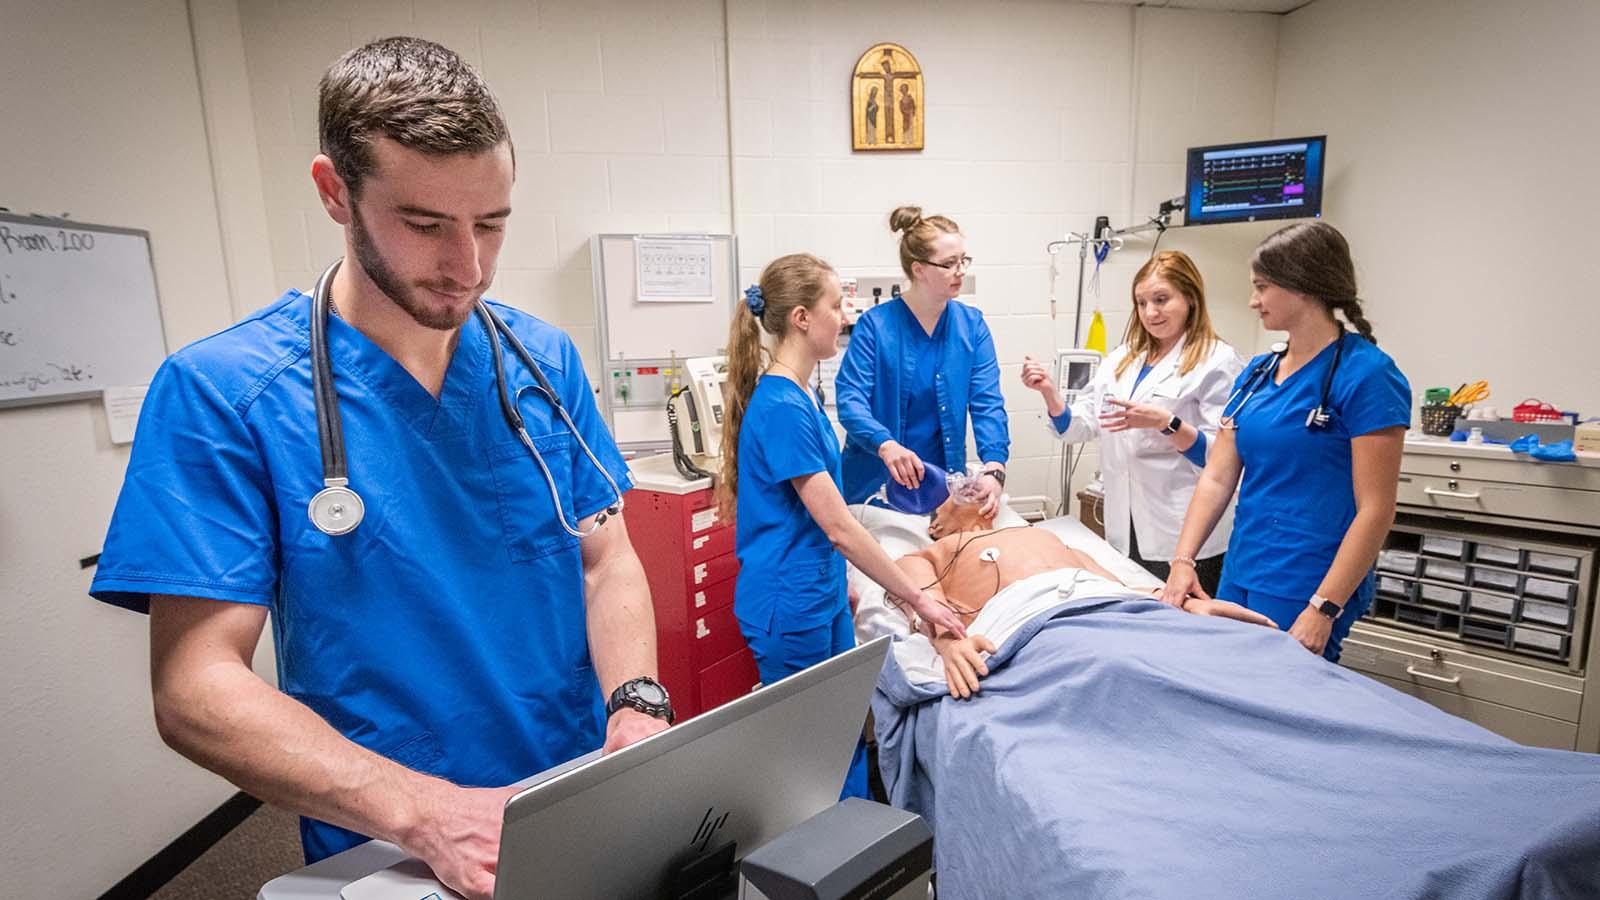 Male nursing student in the foreground on laptop with three nursing students and instructor assessing mannequin in the background